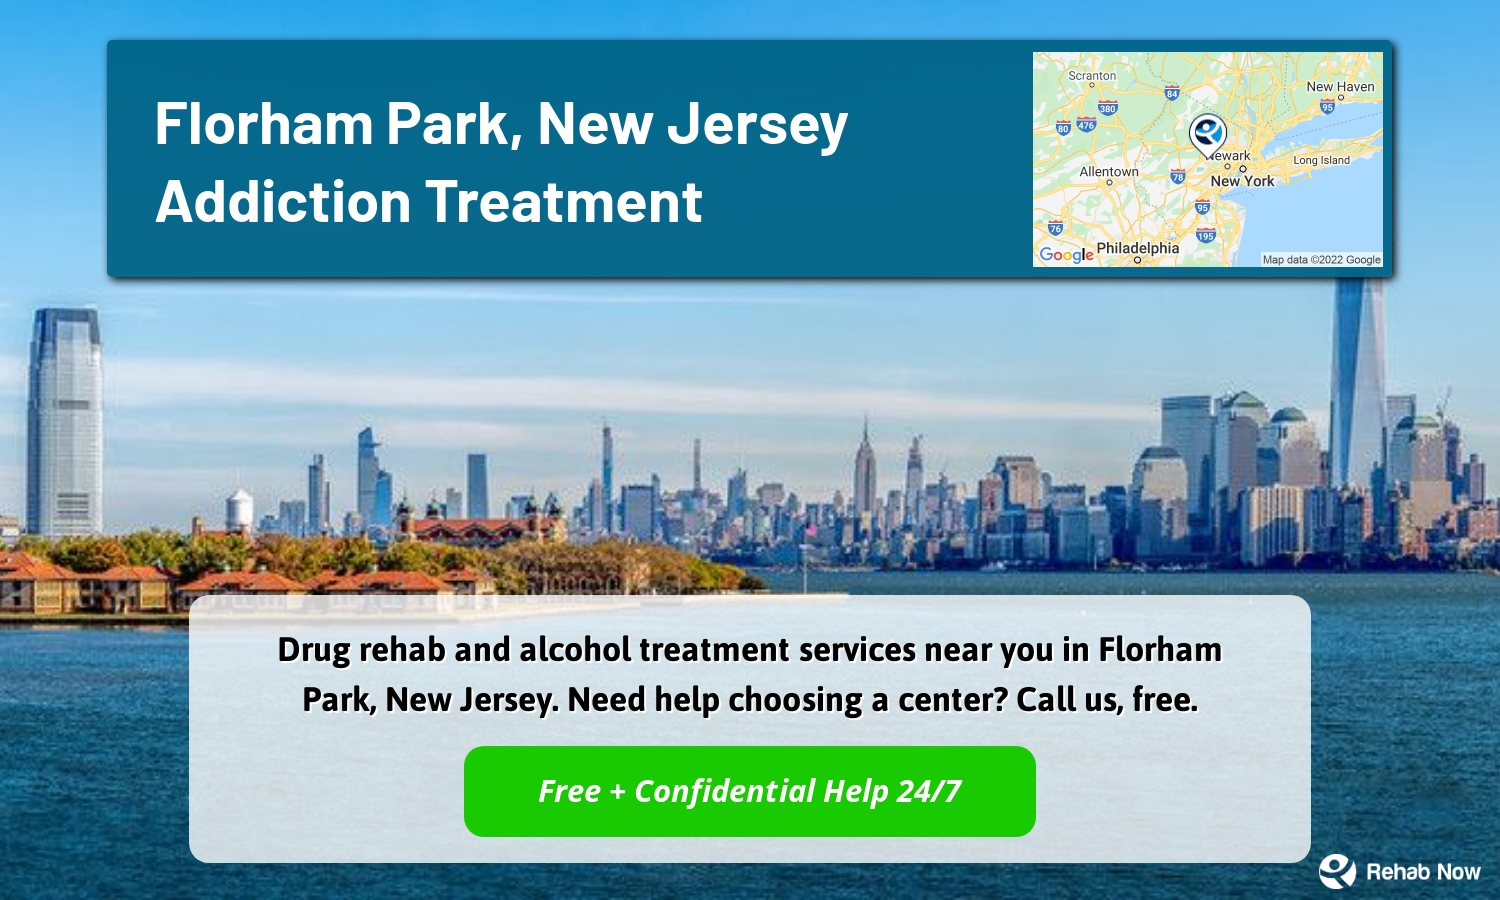 Drug rehab and alcohol treatment services near you in Florham Park, New Jersey. Need help choosing a center? Call us, free.